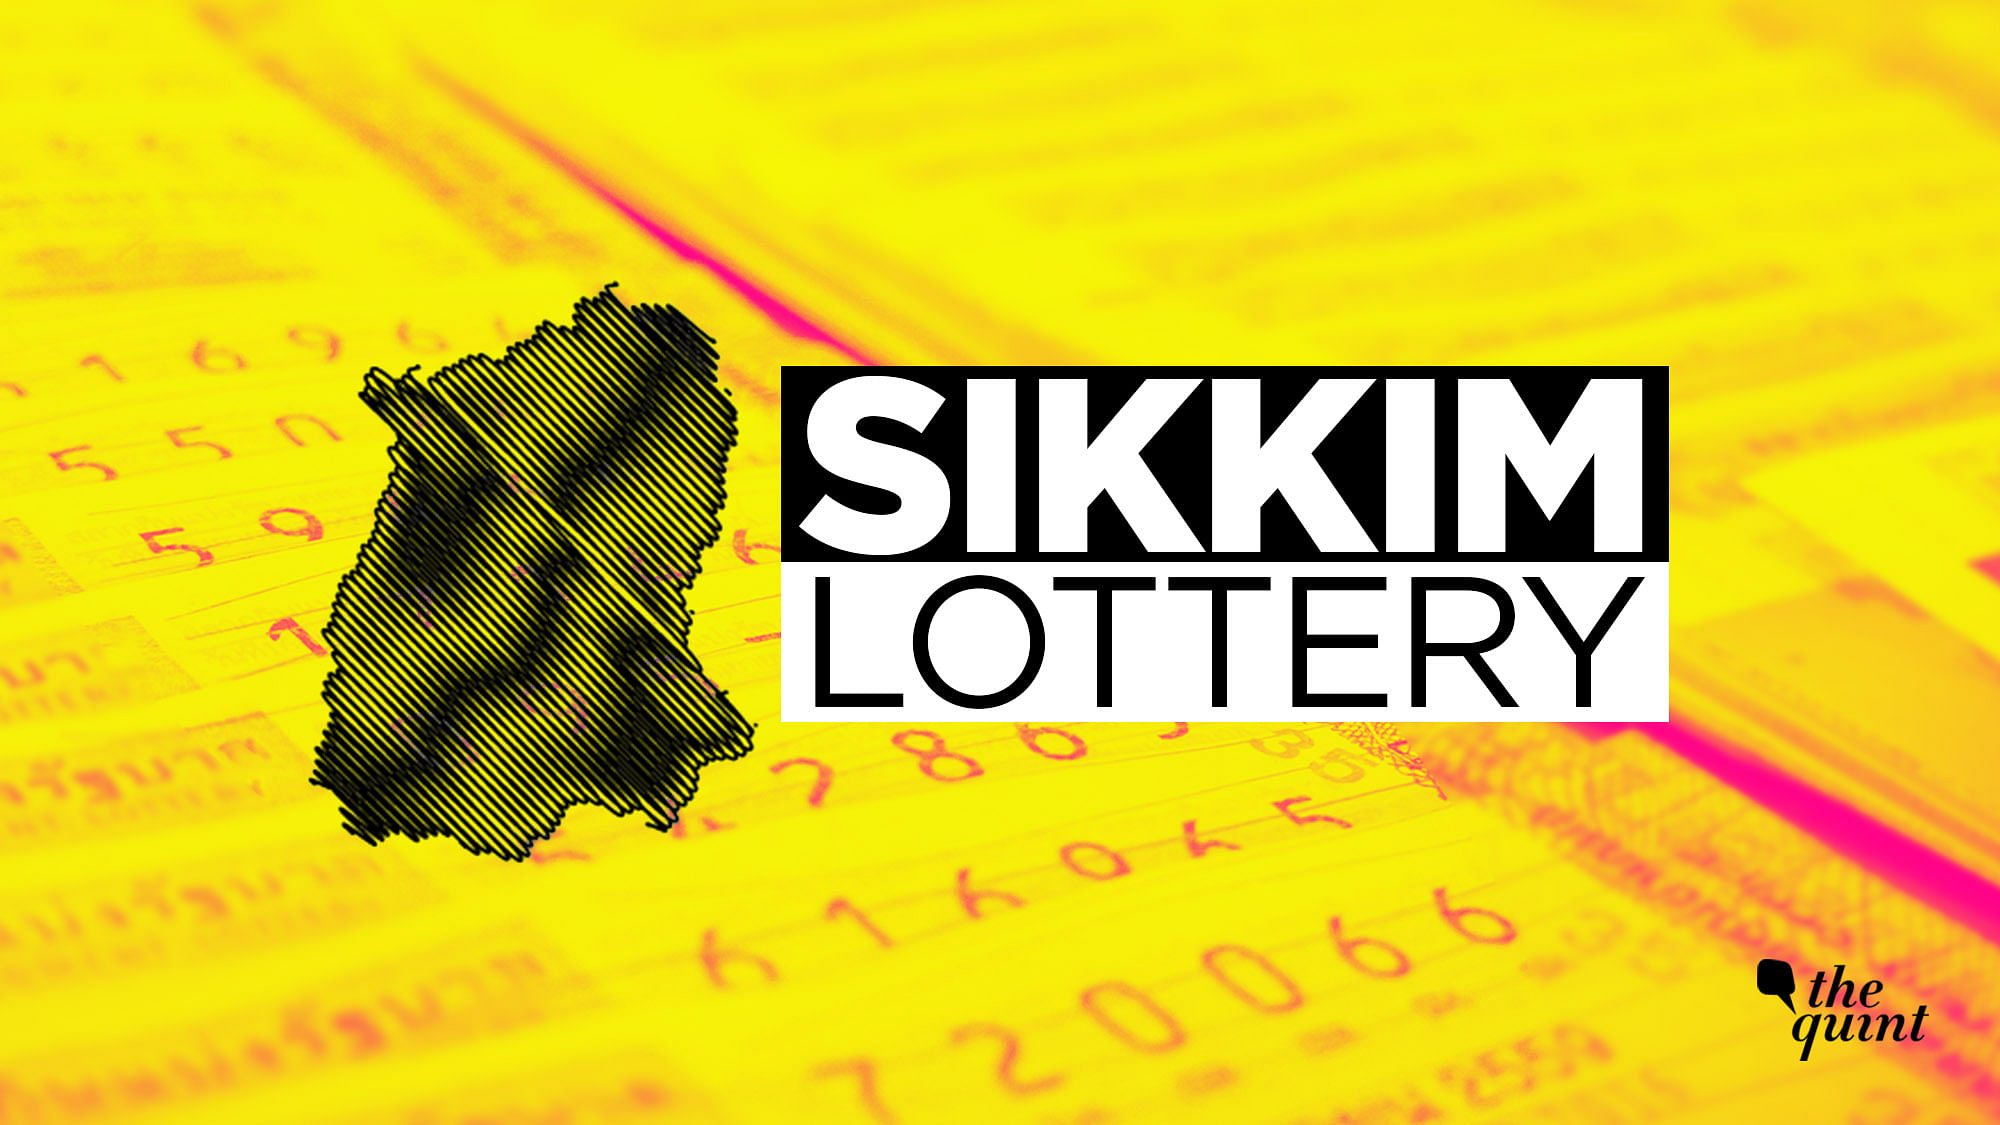 Today Lottery Sambad: The Sikkim lottery results has been declared at 11:55 am on 21 August 2019.